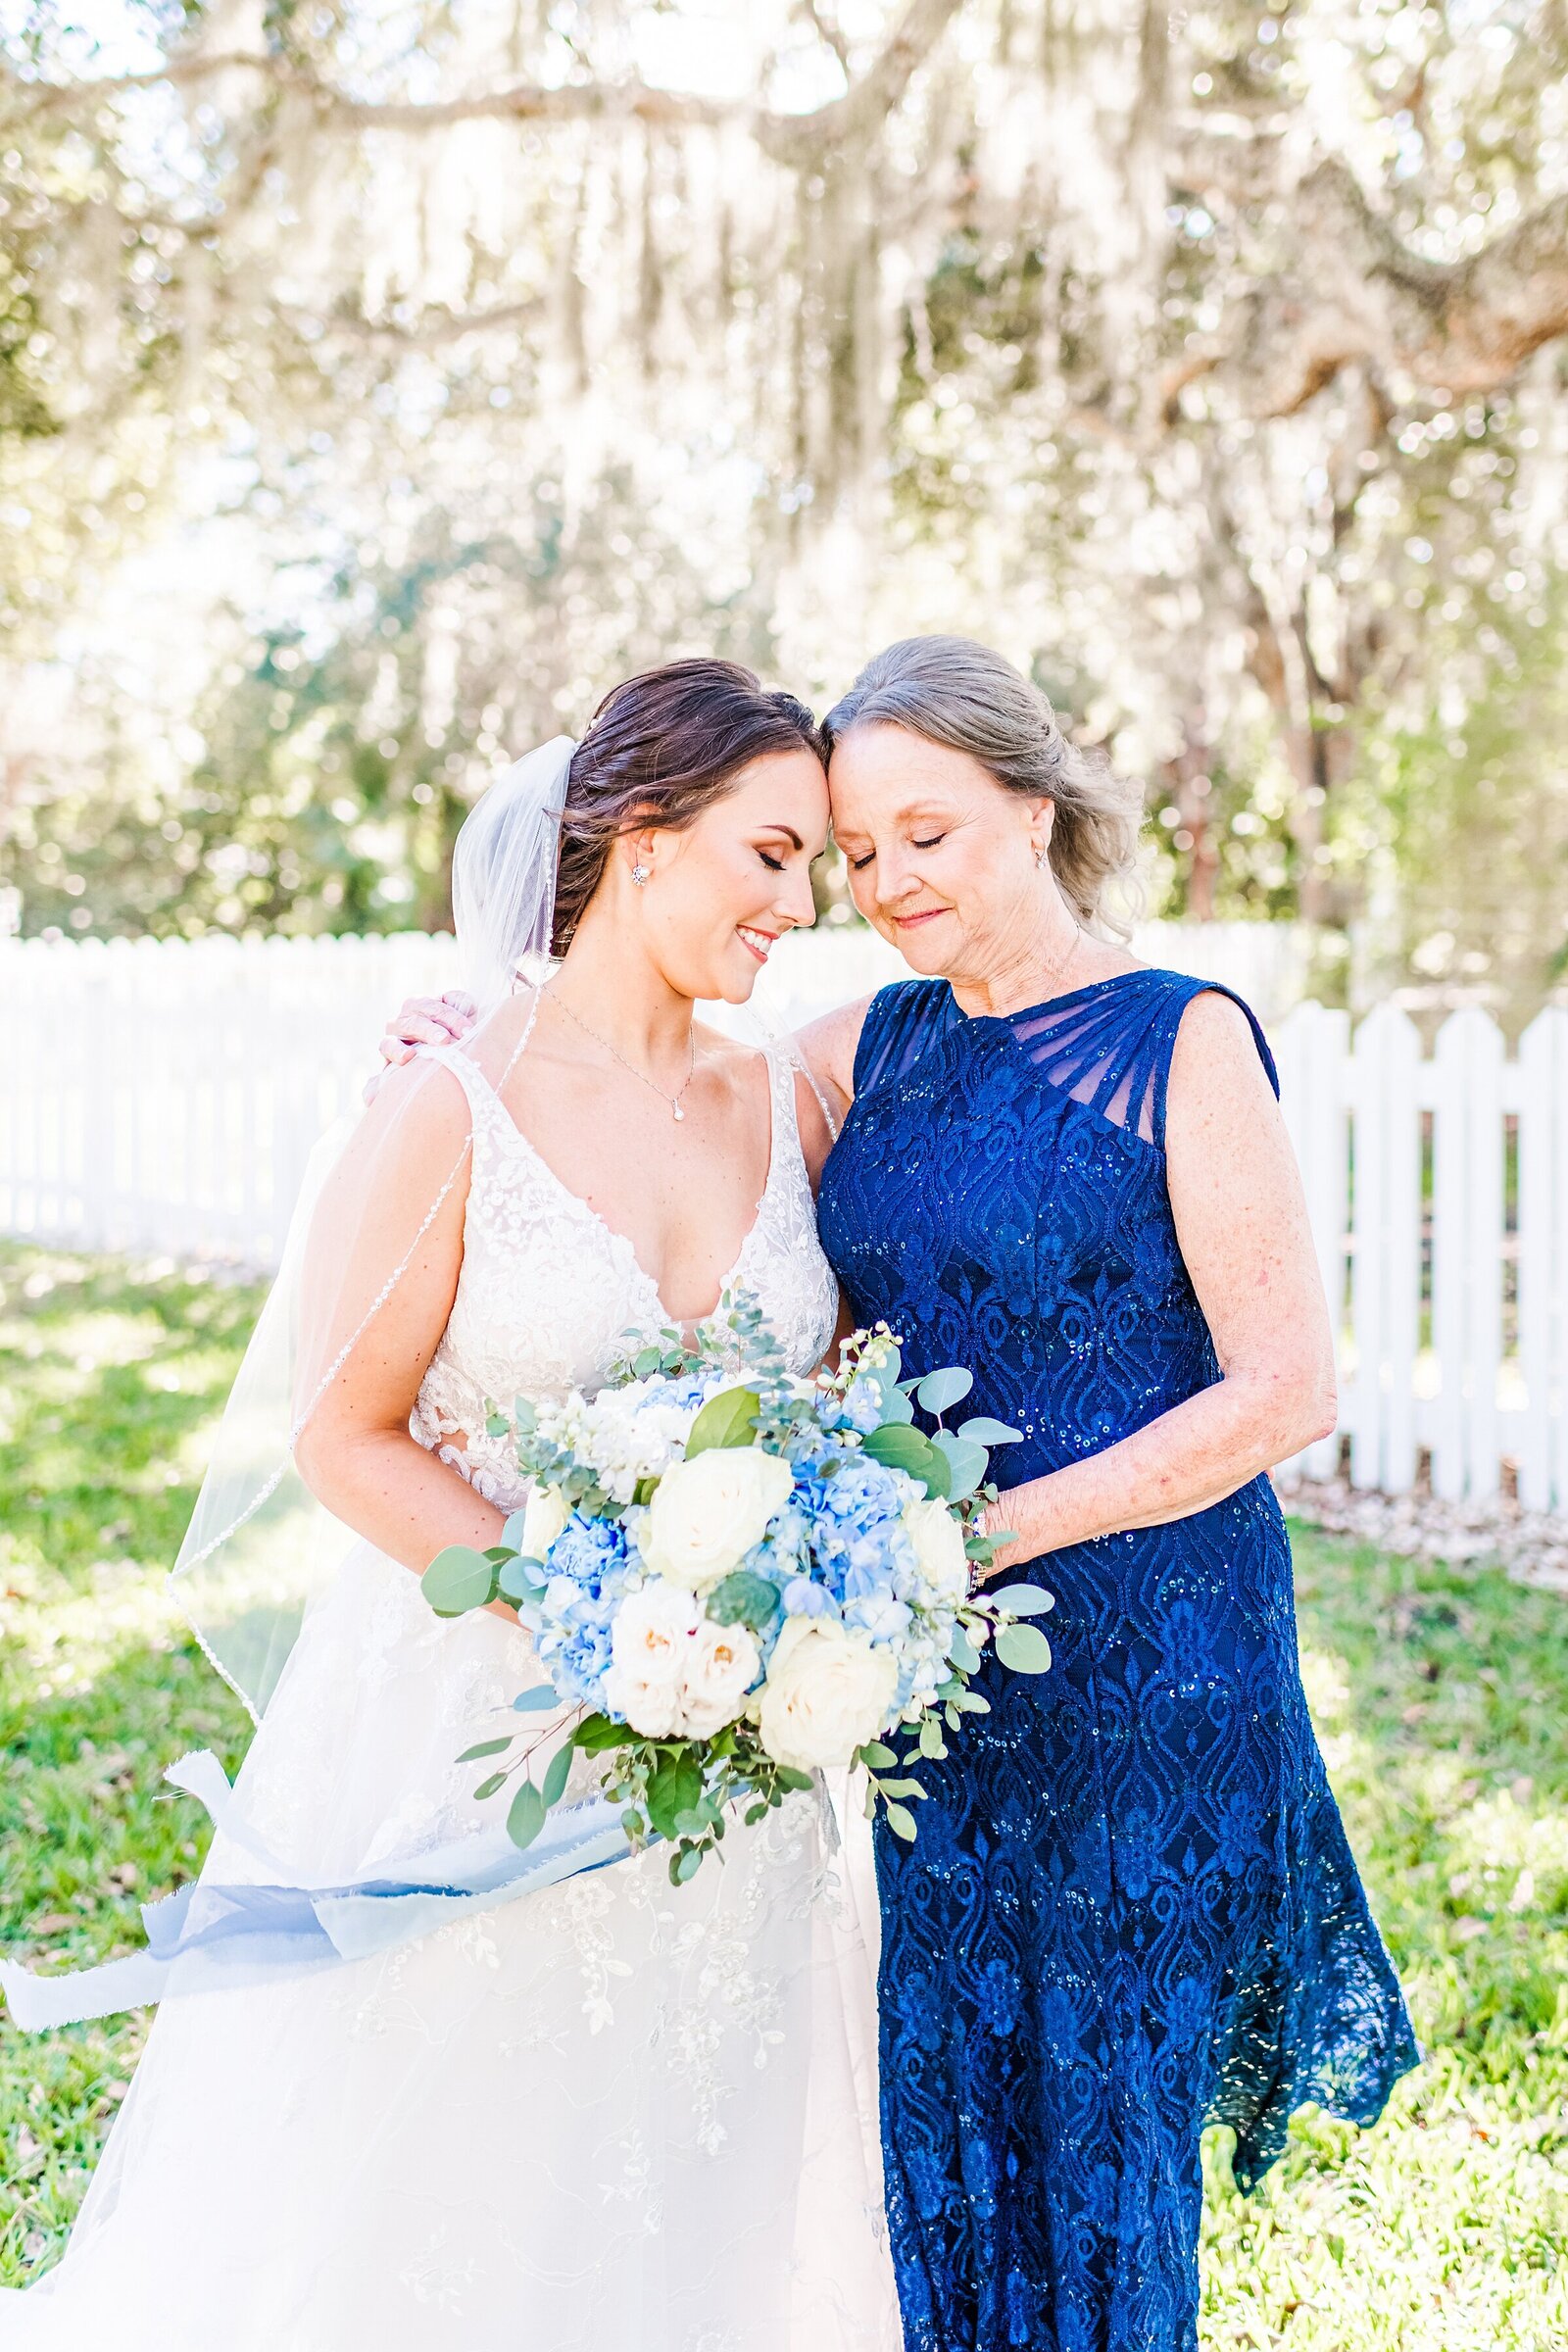 Bride with mother | The Delamater House Wedding | Chynna Pacheco Photography-269